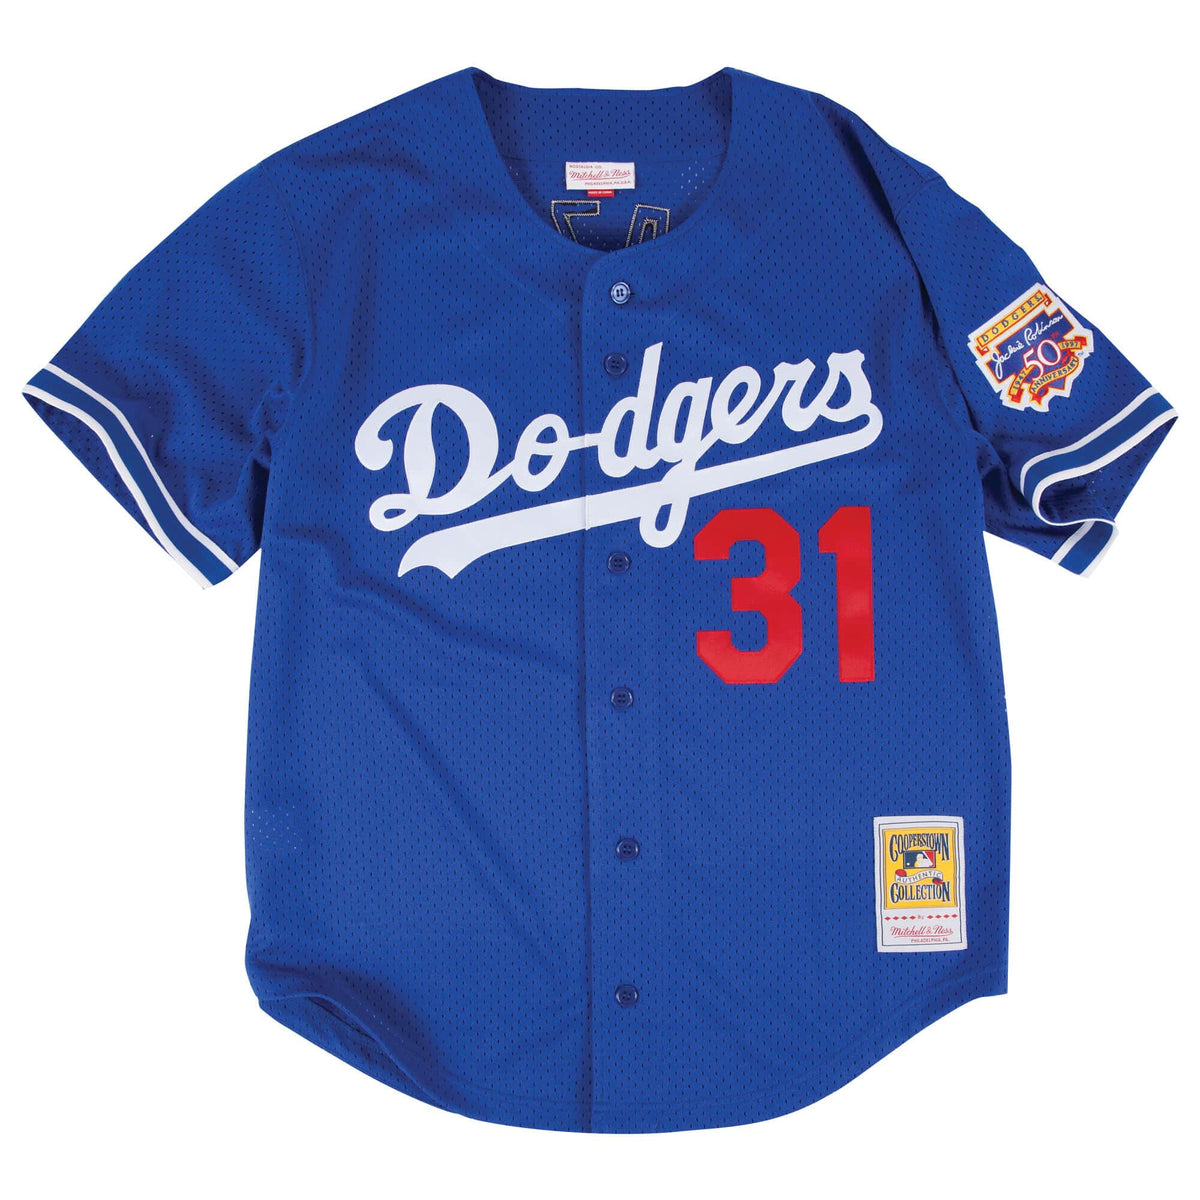 Authentic BP Jersey Los Angeles Dodgers 1997 Mike Piazza